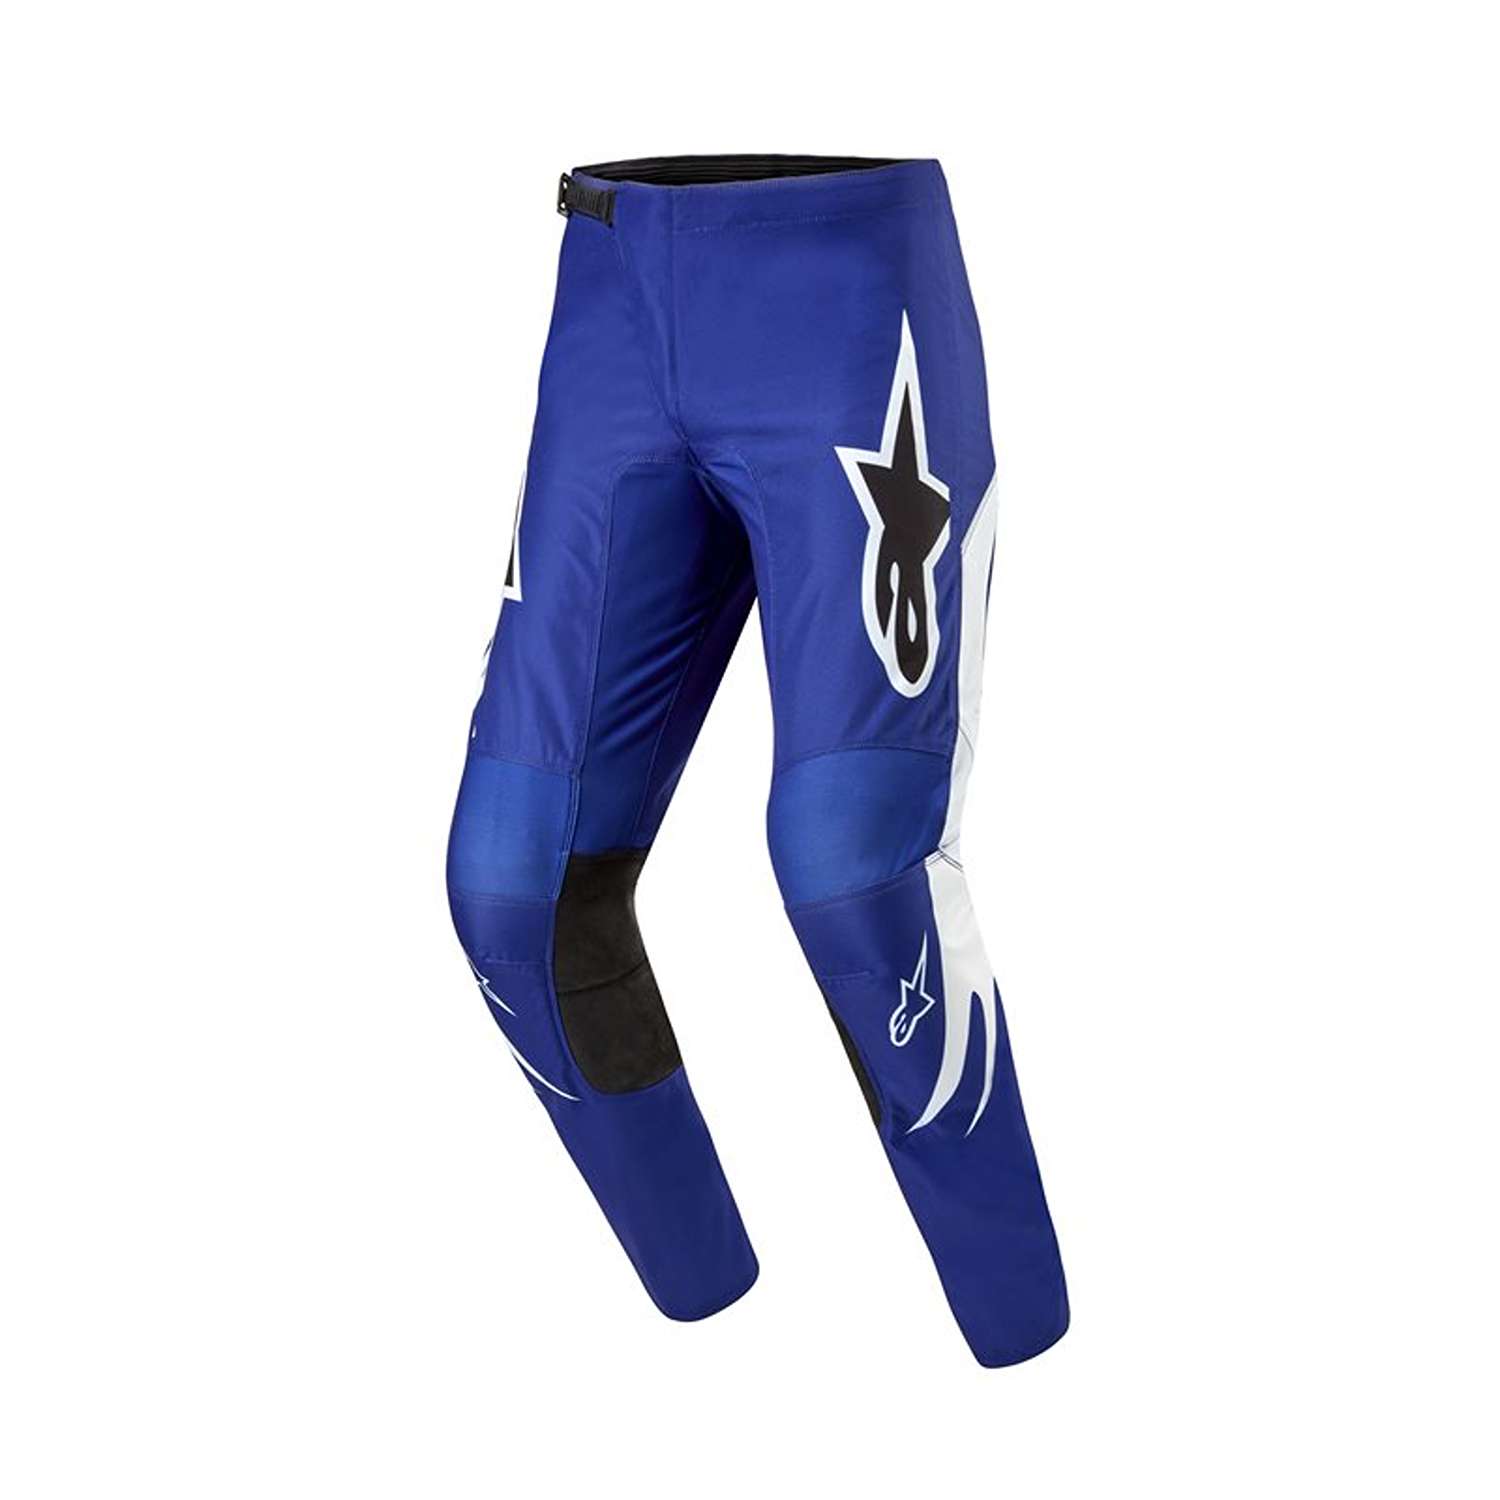 Image of Alpinestars Fluid Lucent Pants Blue Ray White Size 38 ID 8059347266183